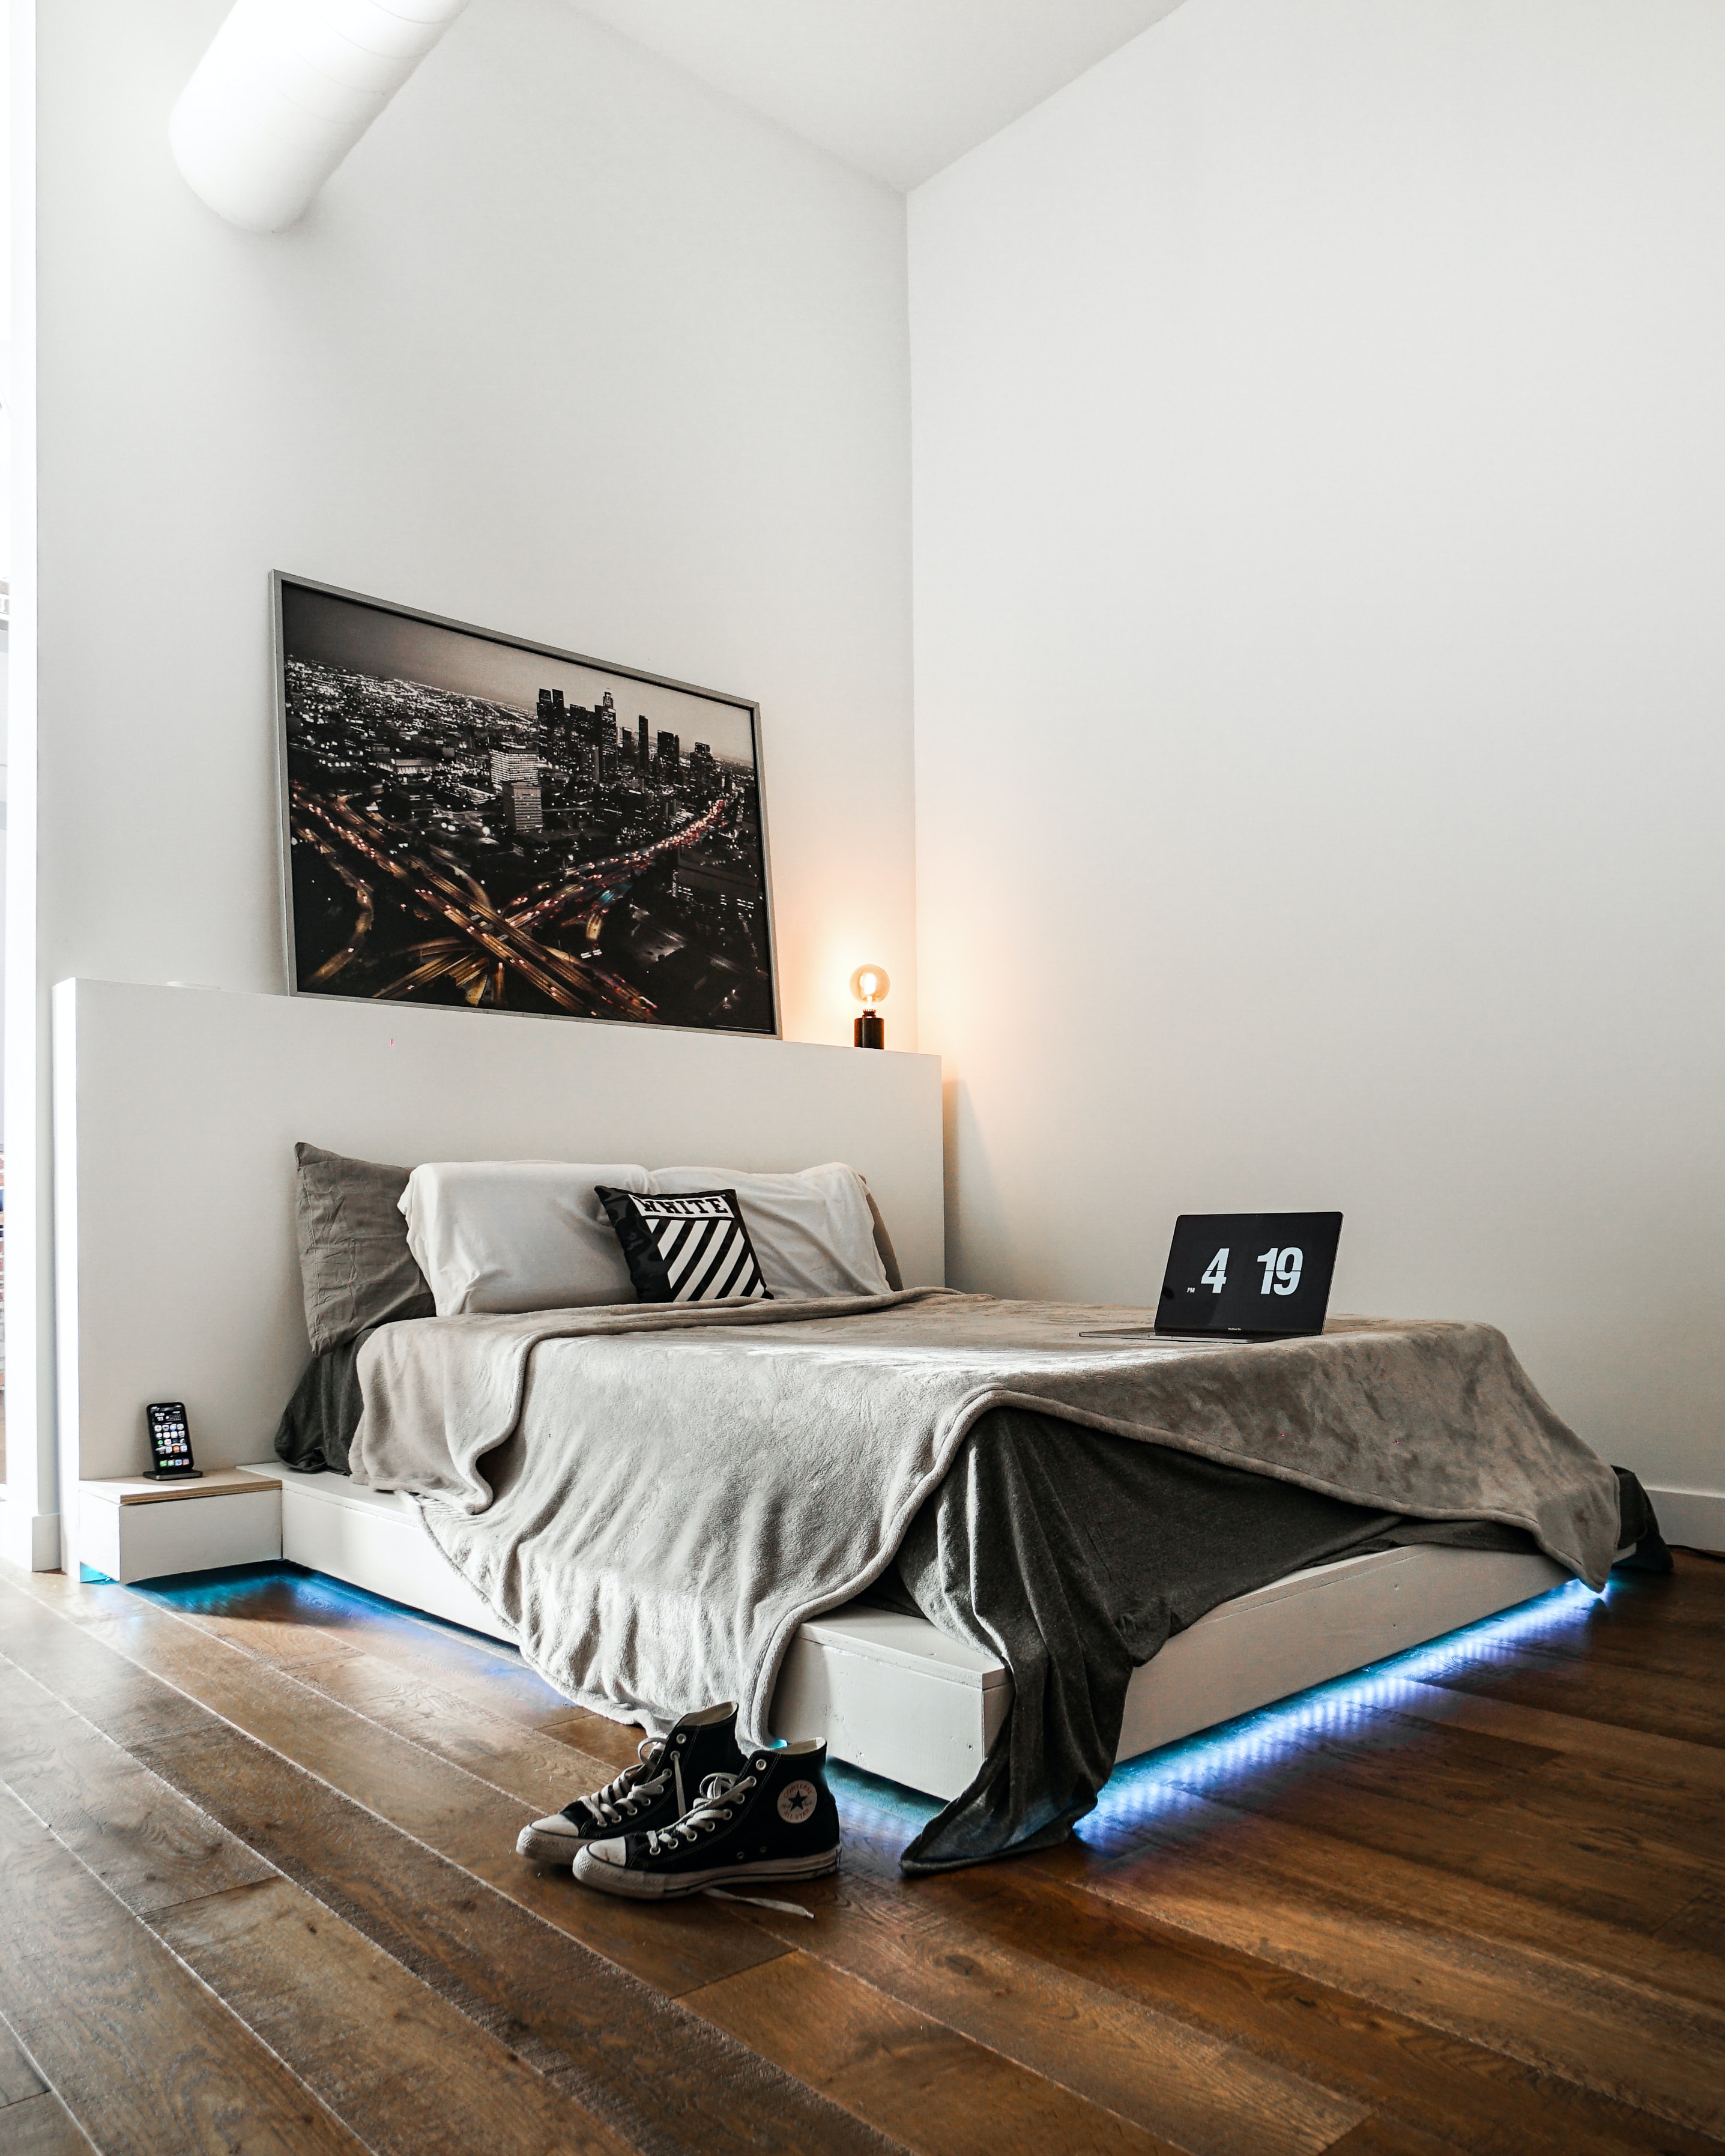 shoes, picture, bed, interior, miscellanea, miscellaneous, sneakers, room for android